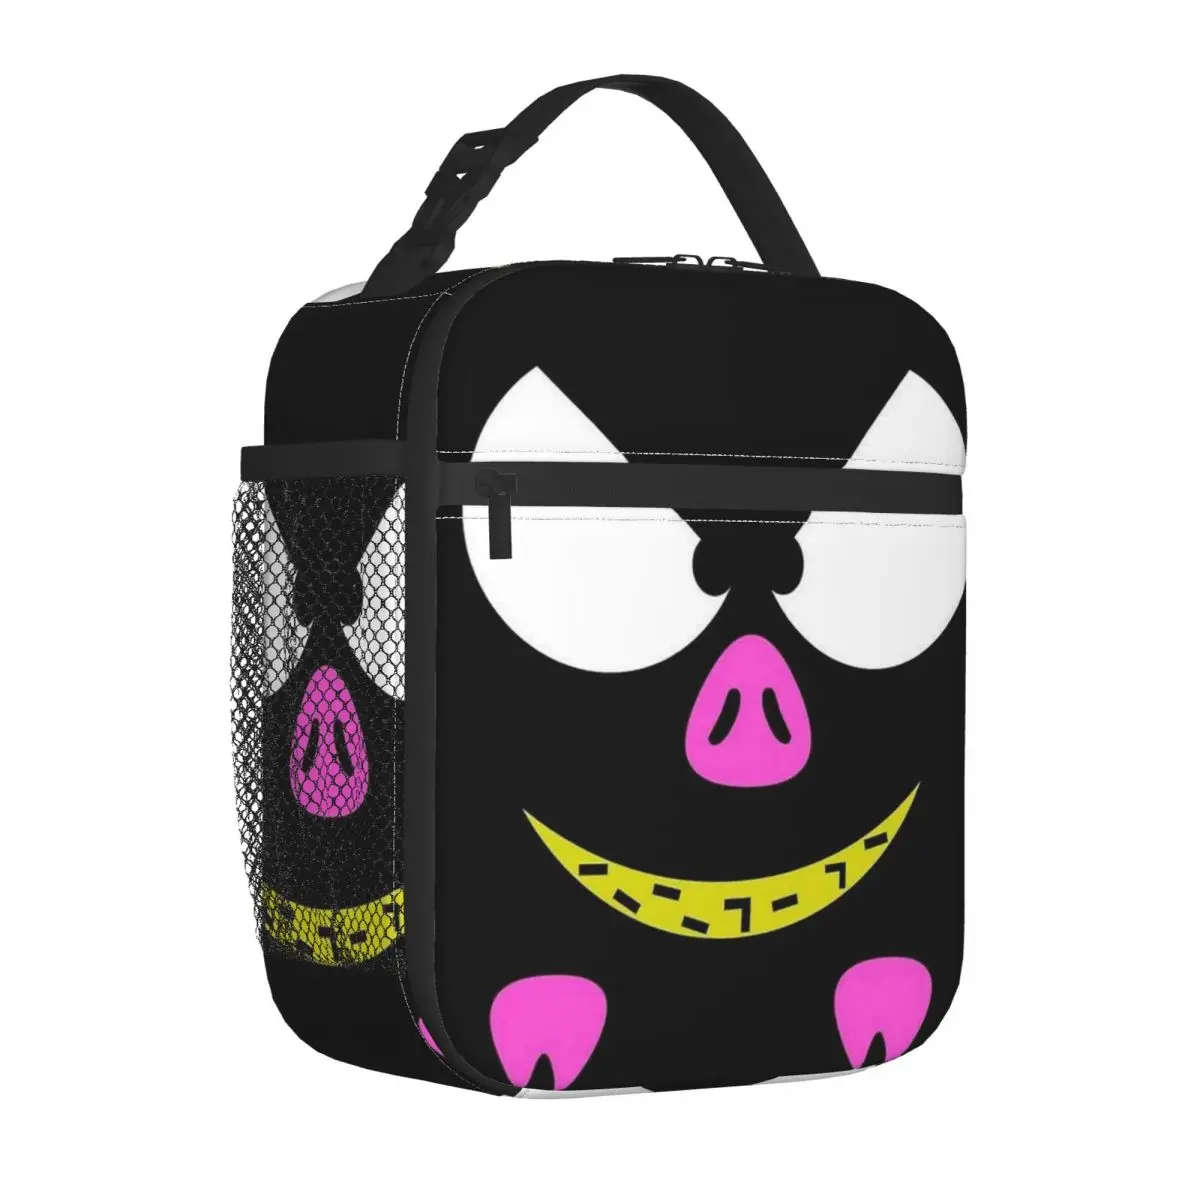 

P-CHAN The Pig Insulated Lunch Bags Portable Anime Ranma Lunch Container Thermal Bag Lunch Box Tote Beach Travel Girl Boy